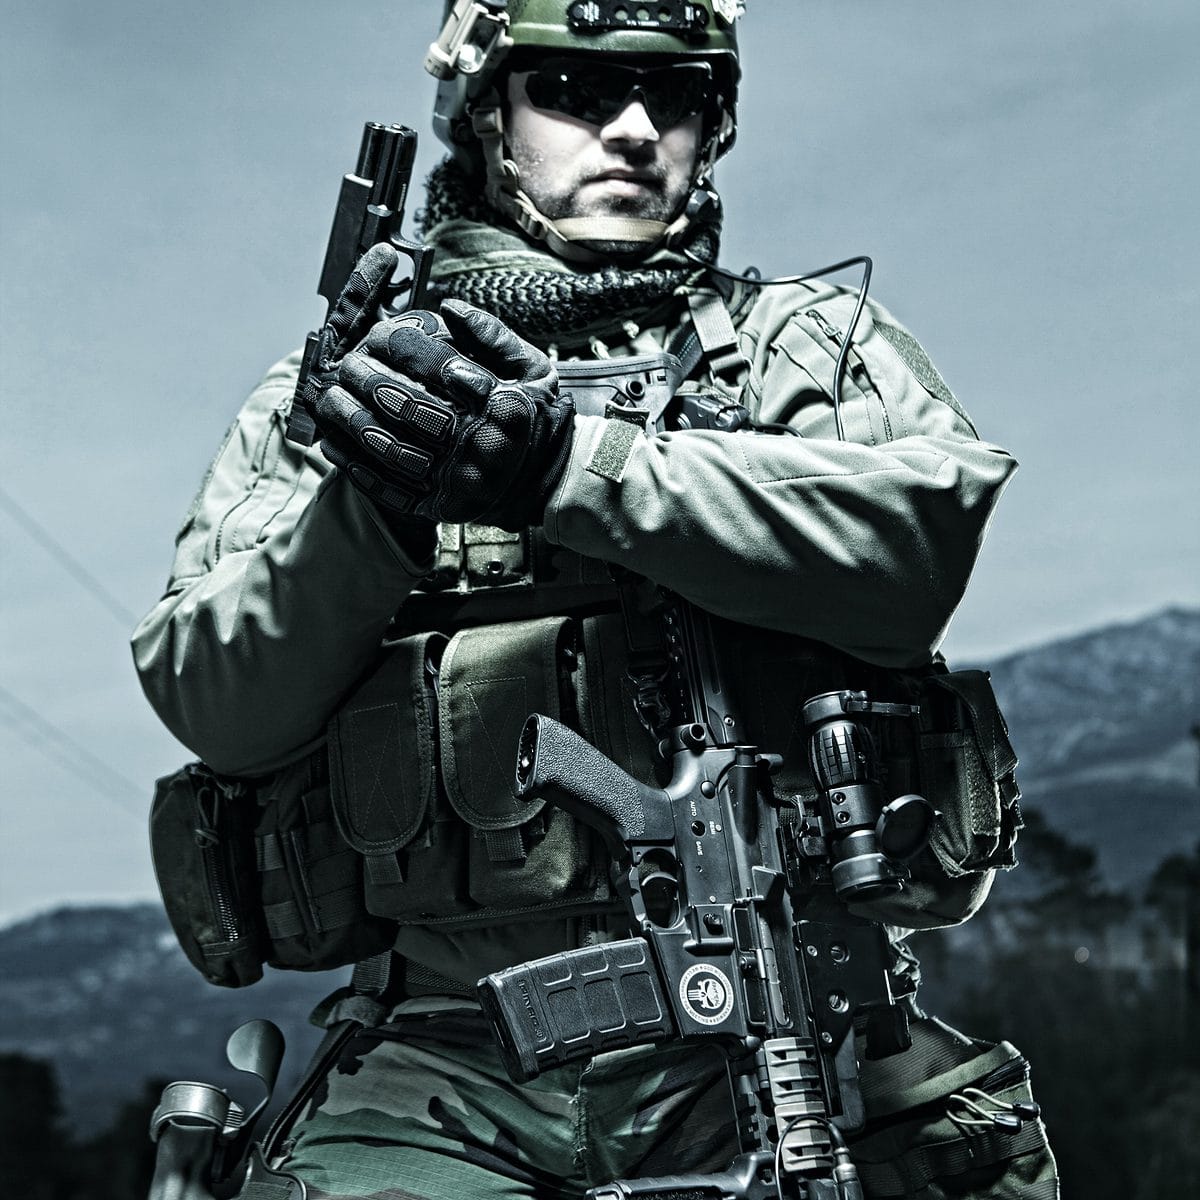 man in green camouflage uniform holding rifle